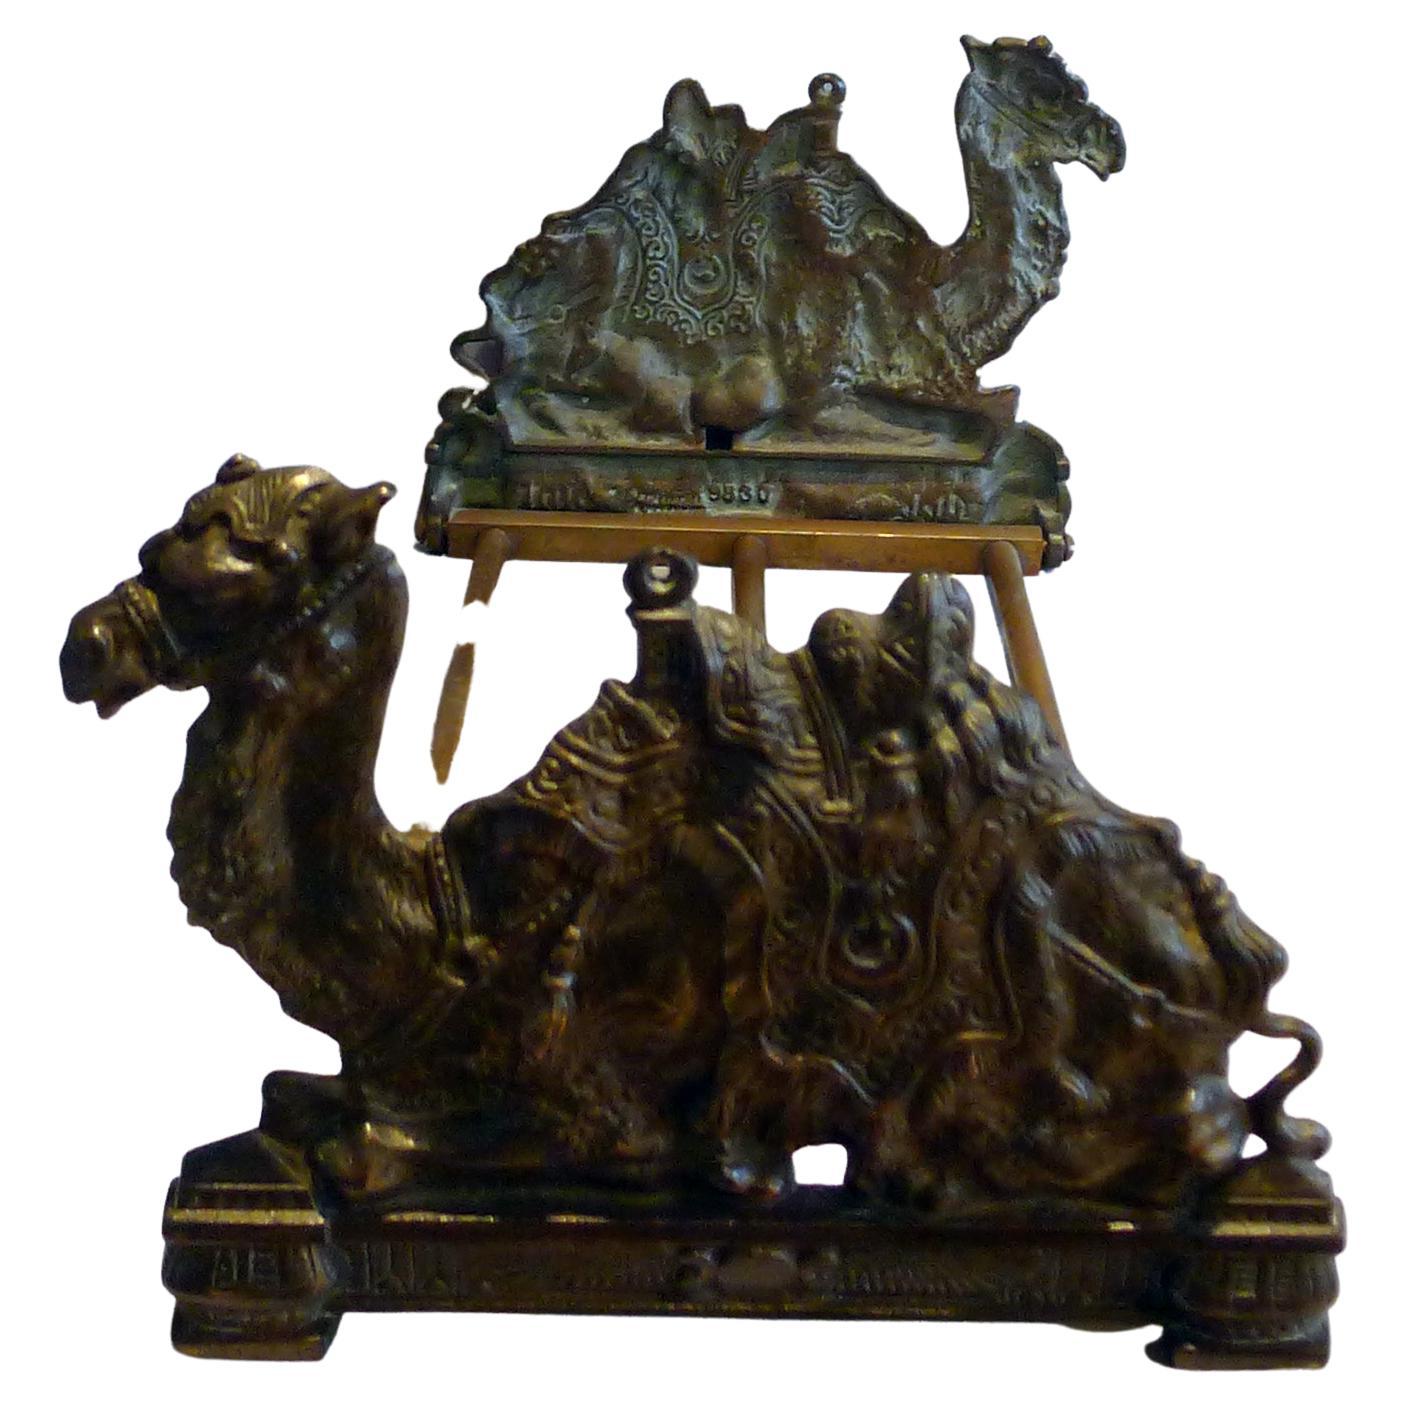 Antique Pair of English Bookends in the Shape of a Camel